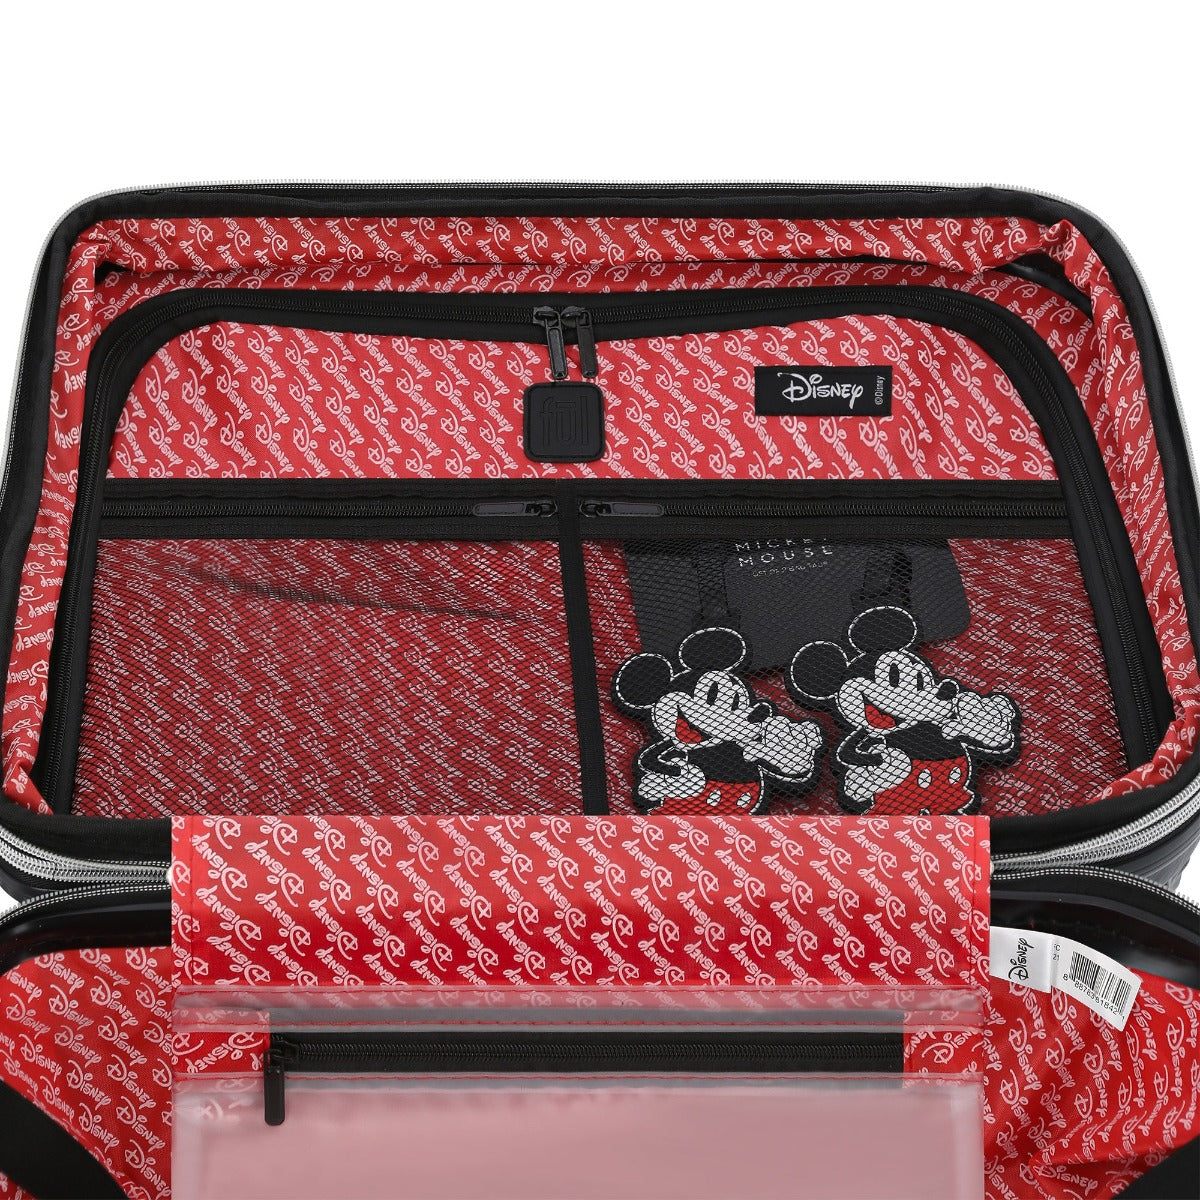 Black Disney Mickey Mouse textured raised shape 22.5" carry-on hardside spinner luggage with ID tags - best hard suitcase for kids and adults